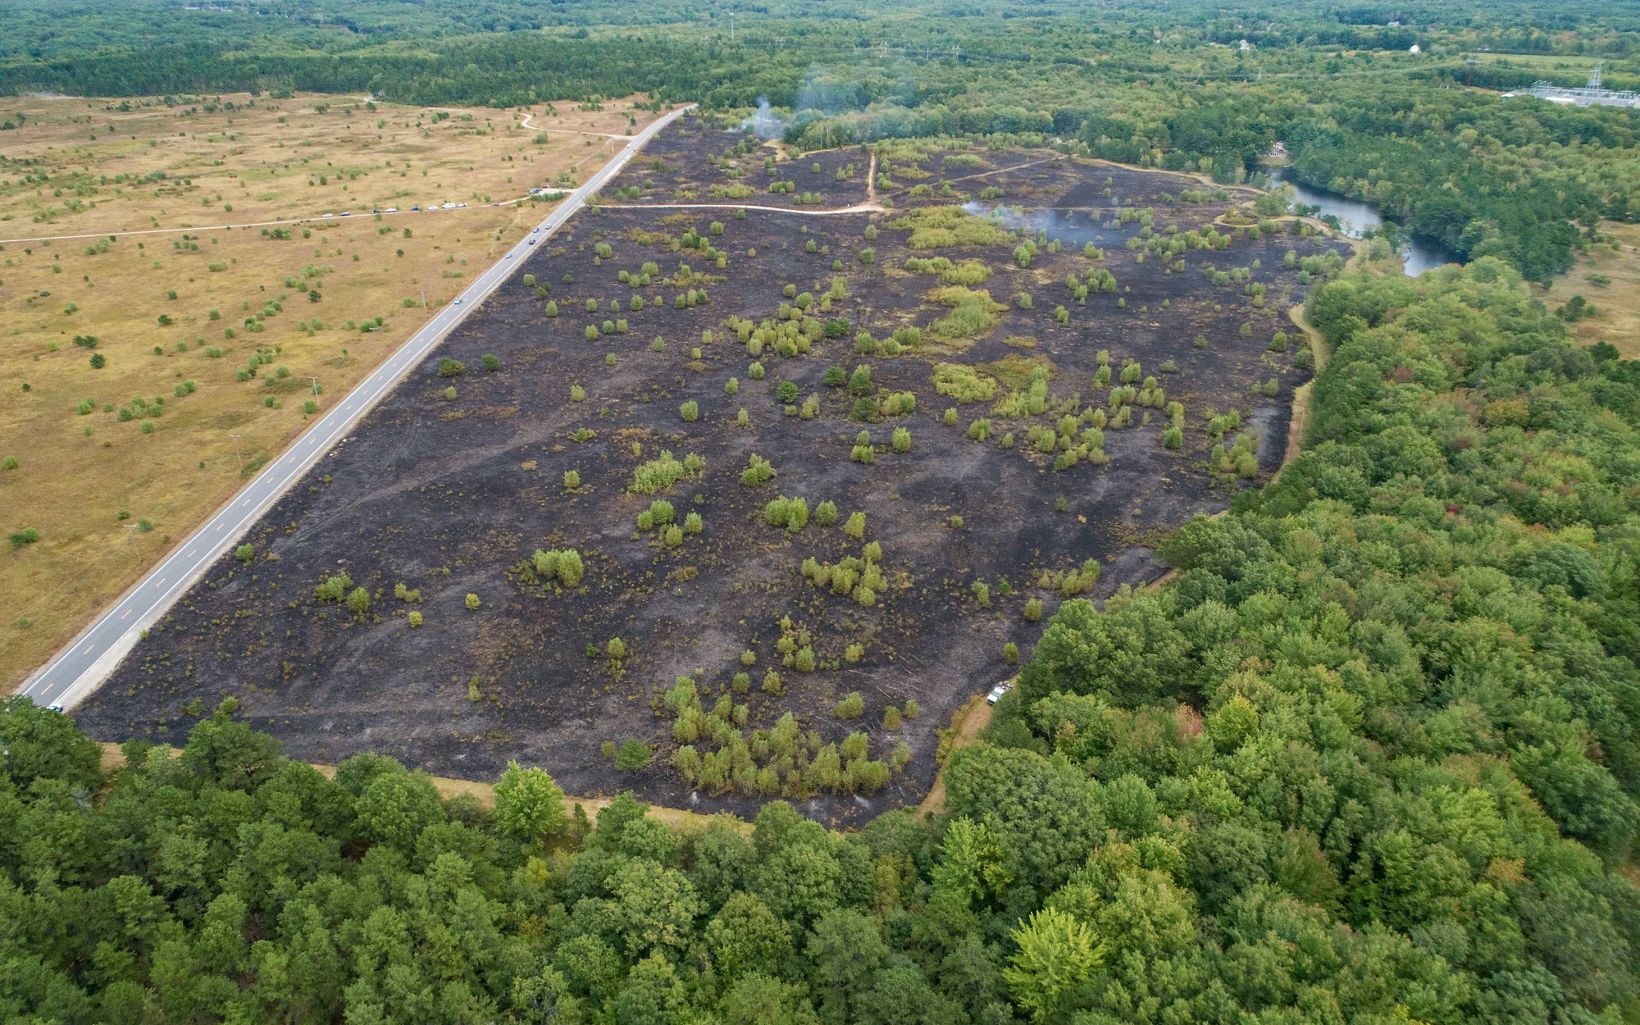 Kennebunk After Burn  An aerial view after a controlled burn on the grassland at The Nature Conservancy's Kennebunk Plains Preserve. © Jerry and Marcy Monkman/EcoPhotography